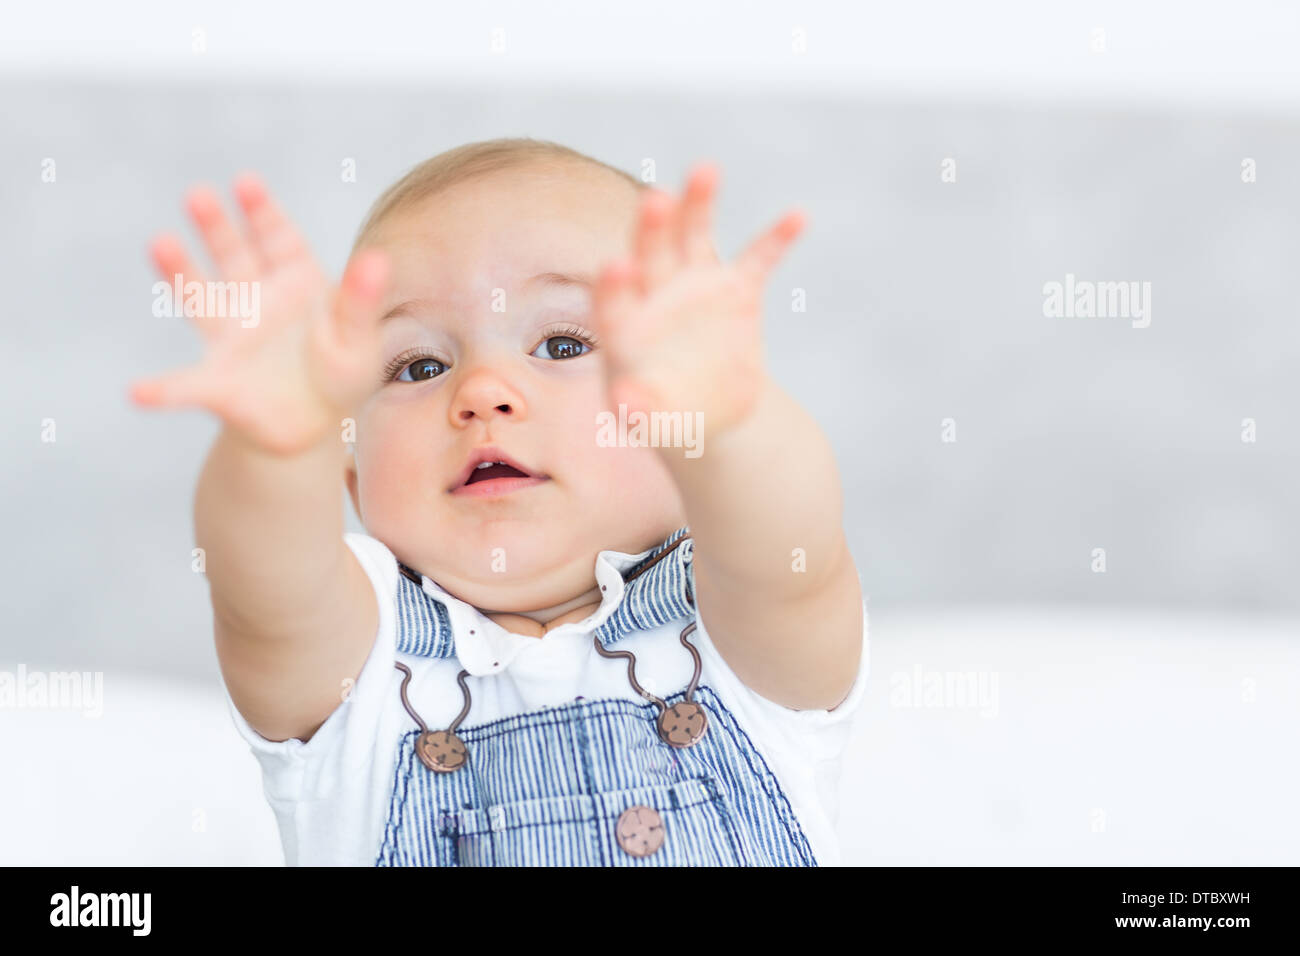 Closeup portrait of a cute baby holding out his hands Stock Photo